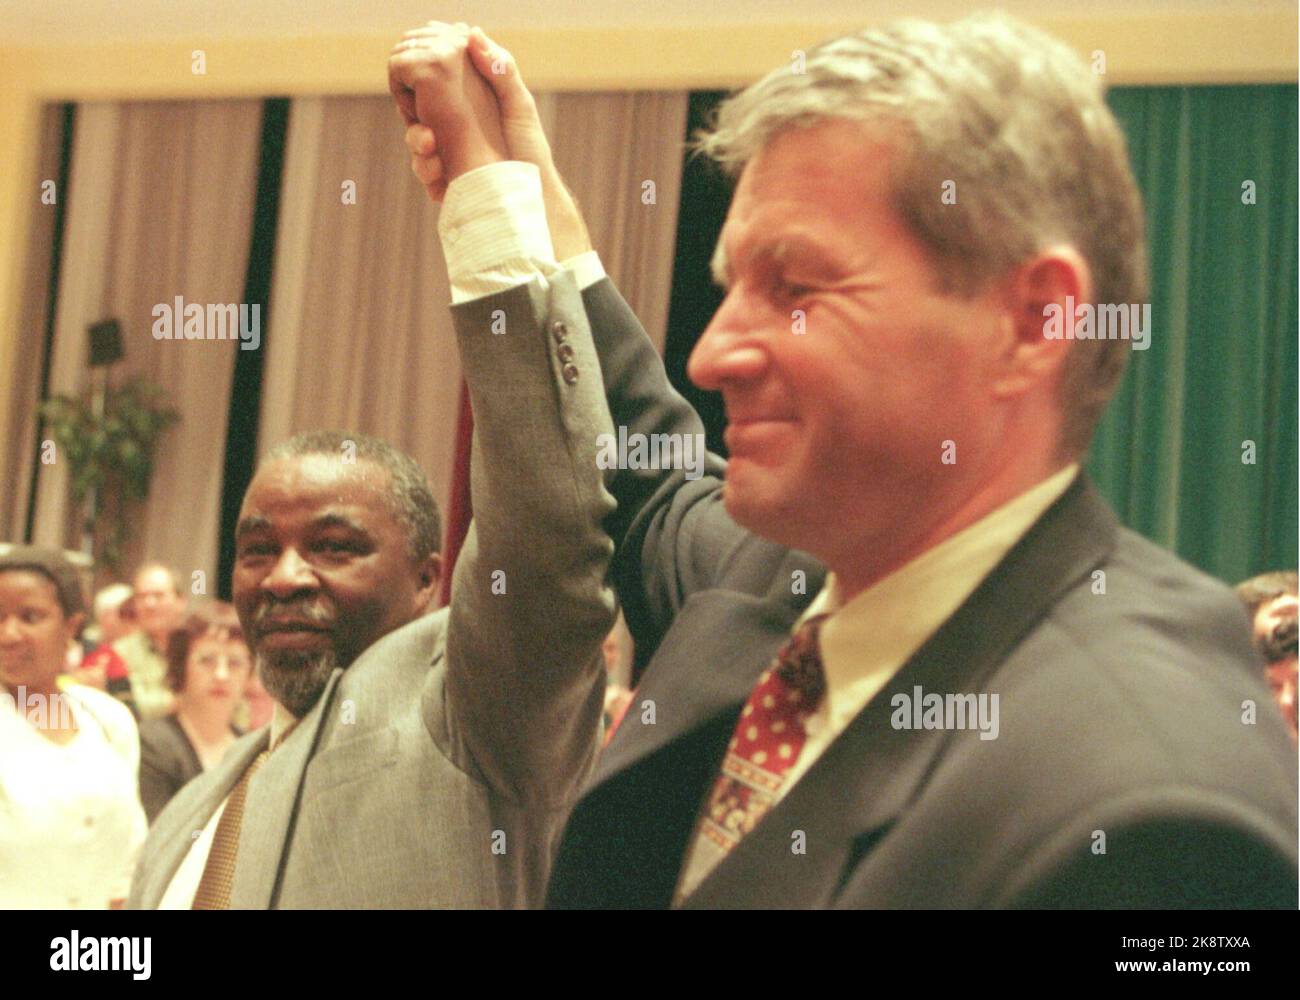 South Africa's Vice President Thabo Mbeki and Prime Minister Thorbjørn Jagland at the Labor Party's 56th ordinary national meeting. Mbeki today spoke to the national meeting. Stock Photo